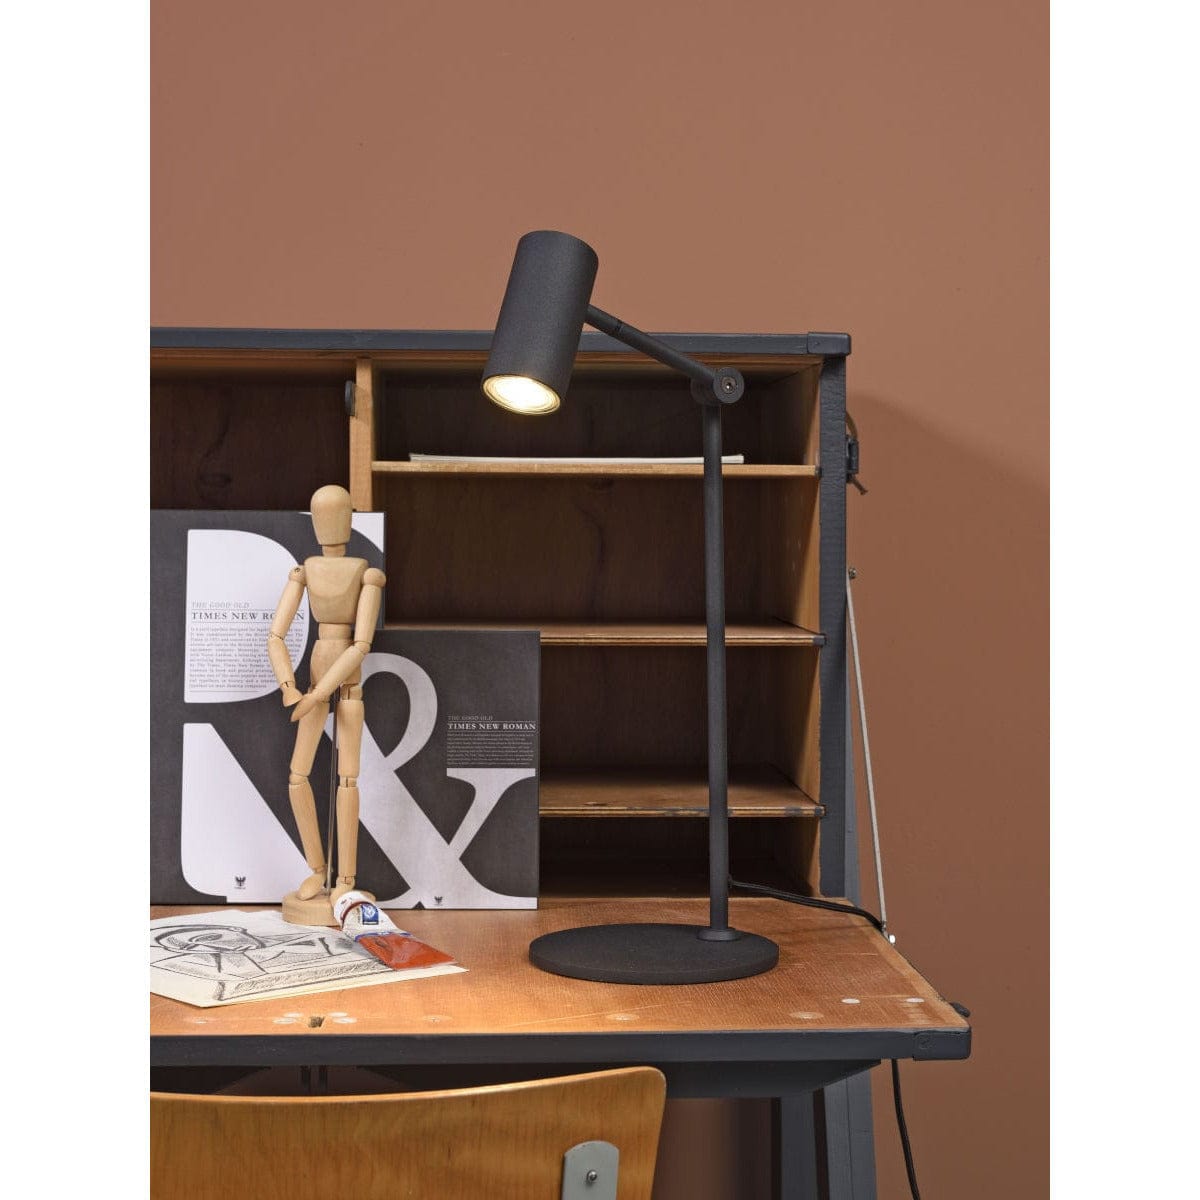 It's About RoMi Table Lamp Montreux Table Lamp, Black or Sand